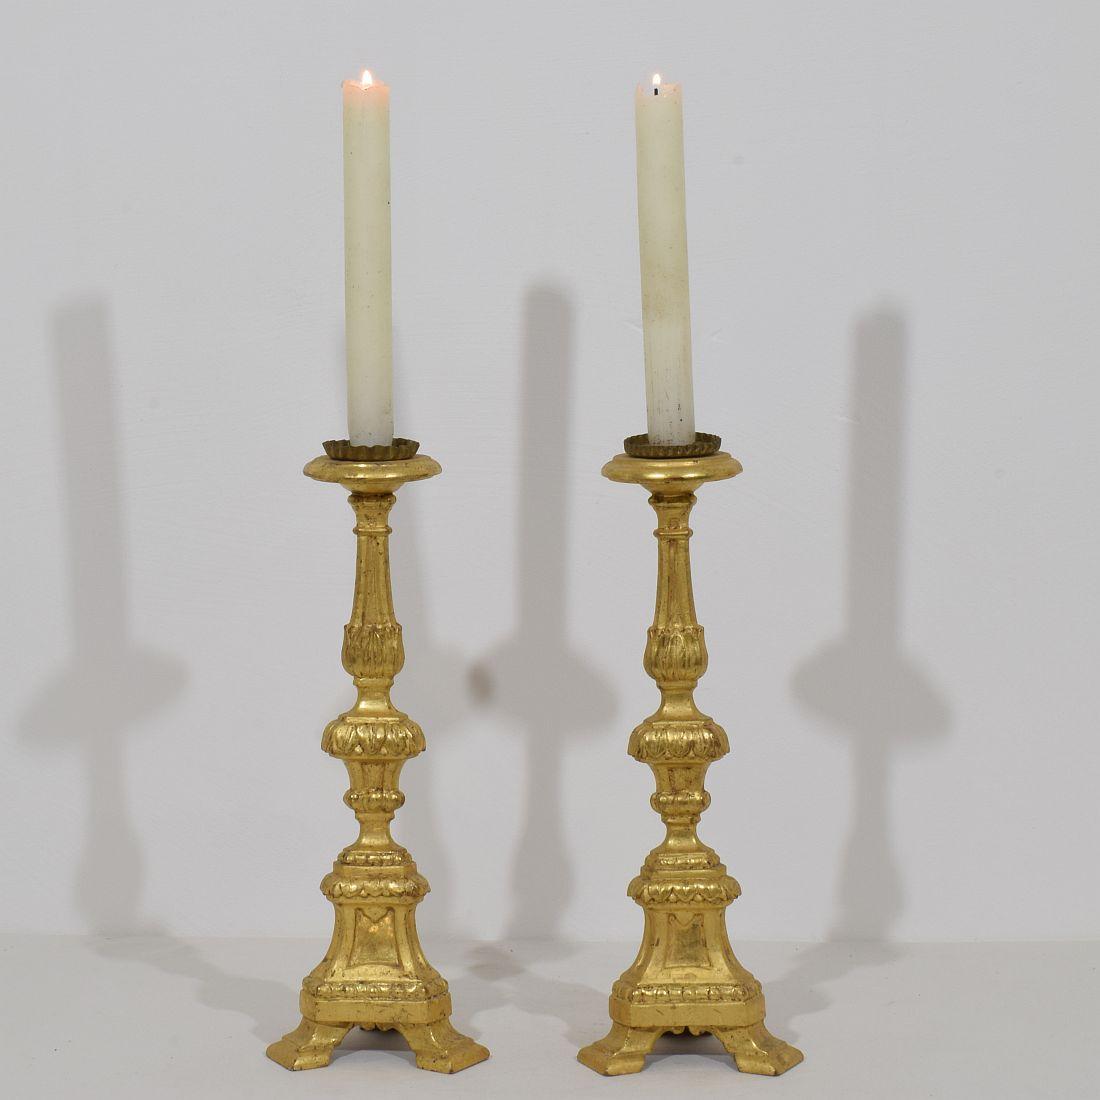 Great pair of wooden candleholders with their original gilding.
Very nice type candleholder and rare to find in a pair.
Italy, circa 1780-1800.
Weathered, old repair
Measurements include the metal peak.